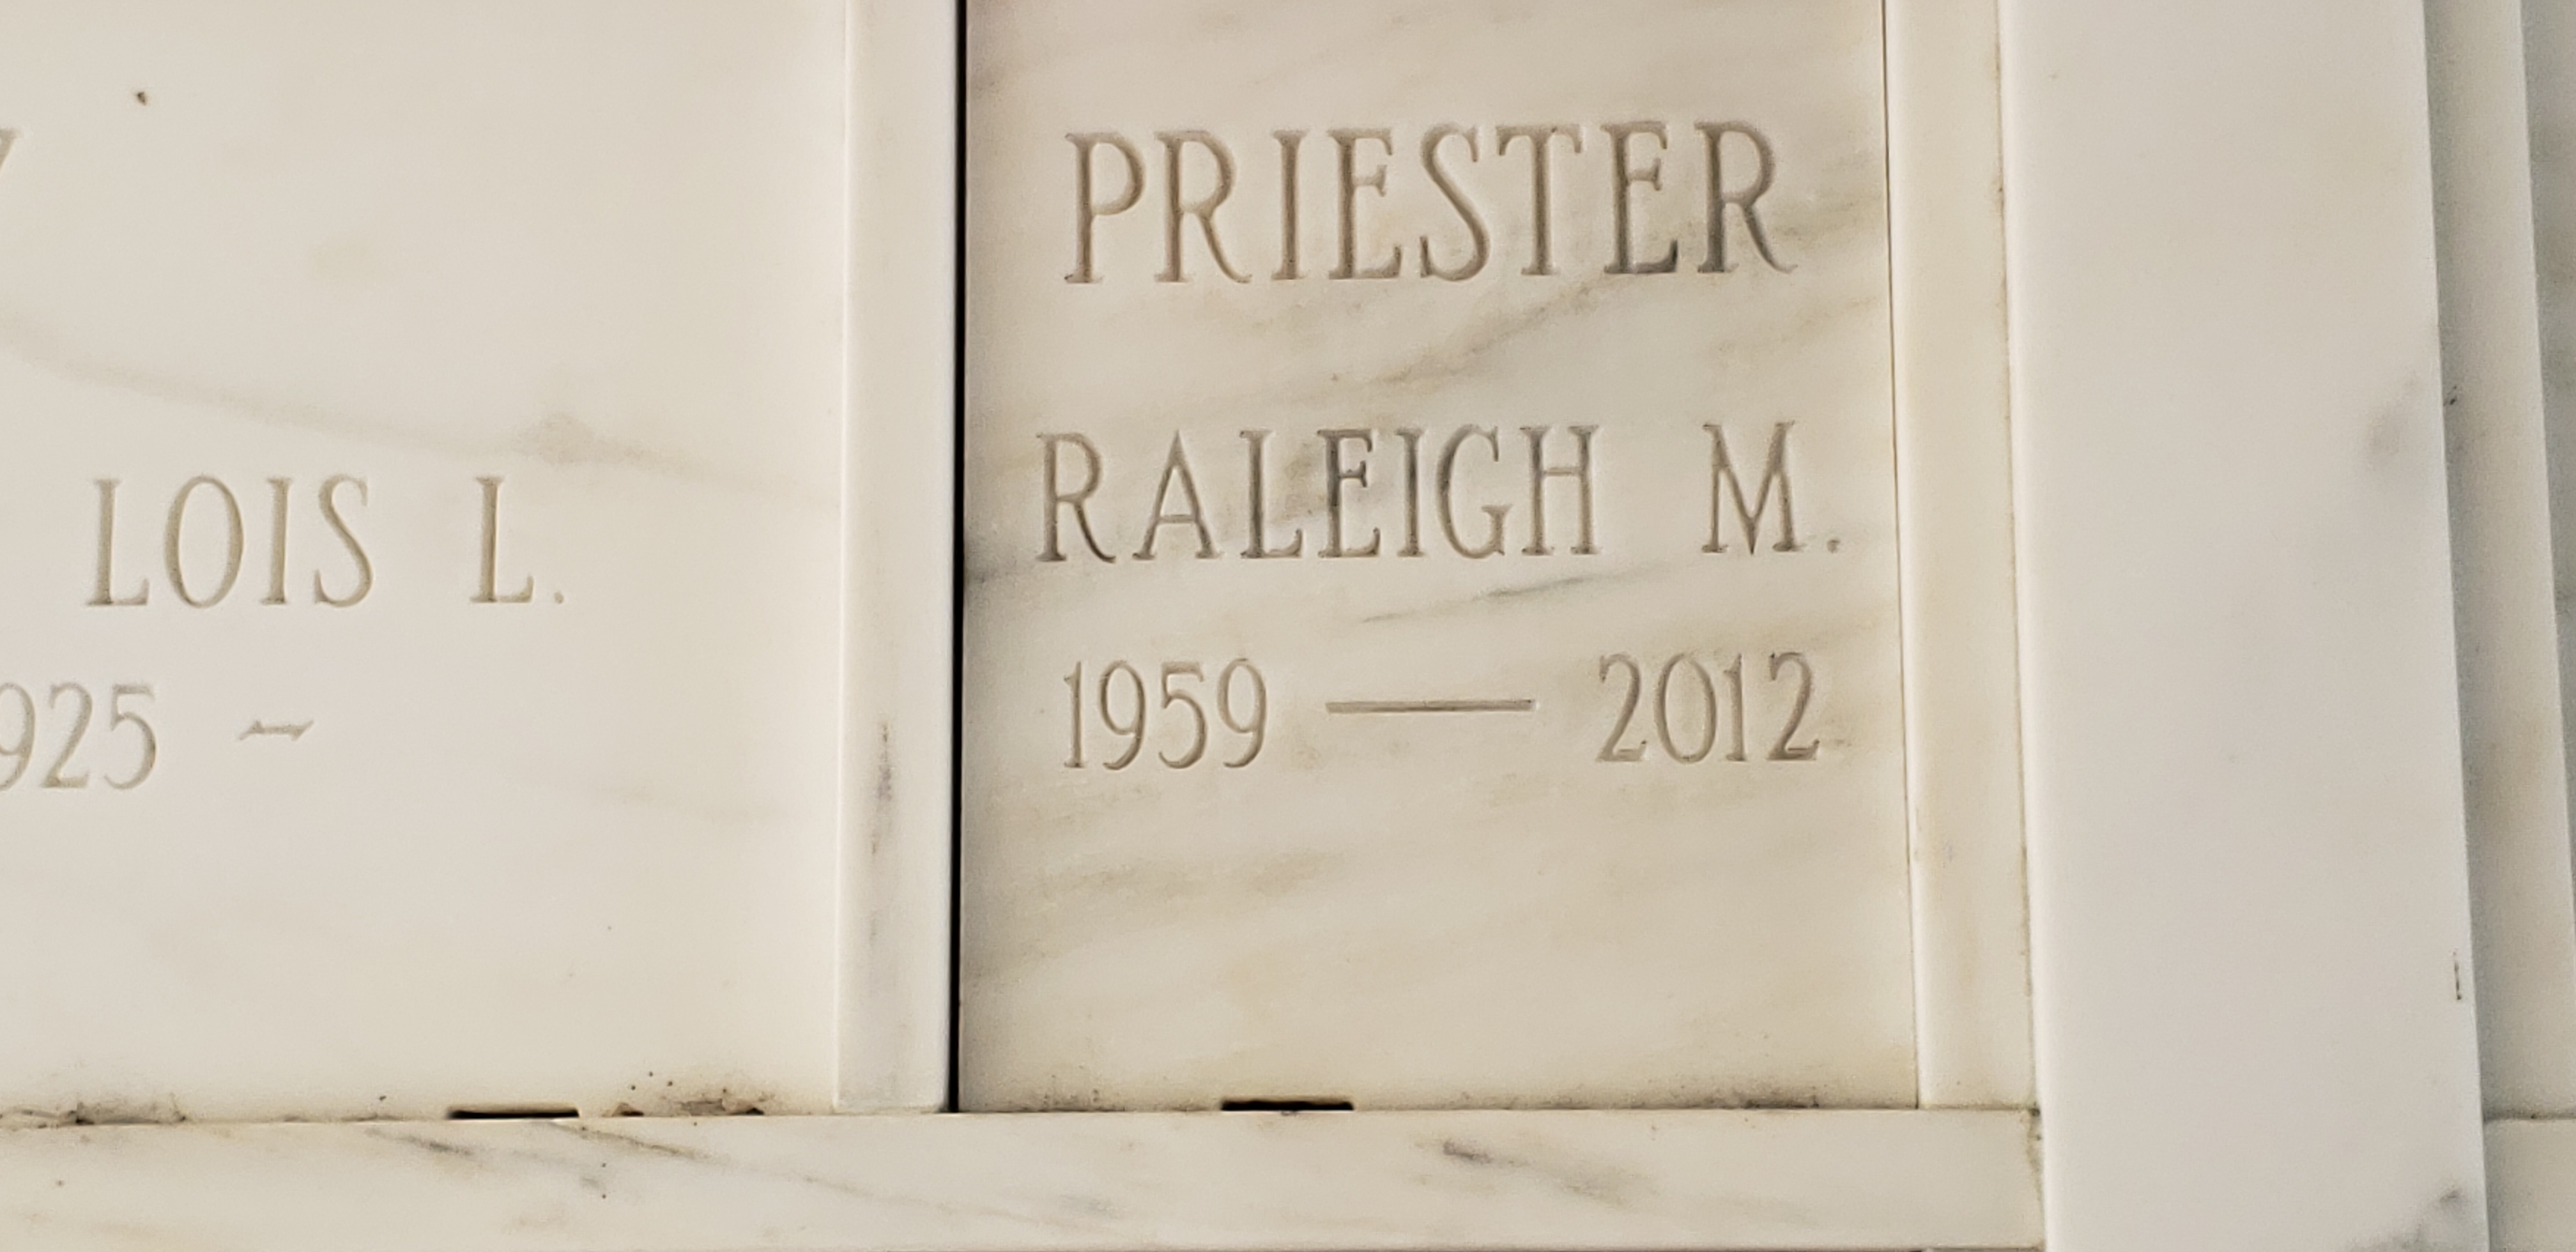 Raleigh M Priester